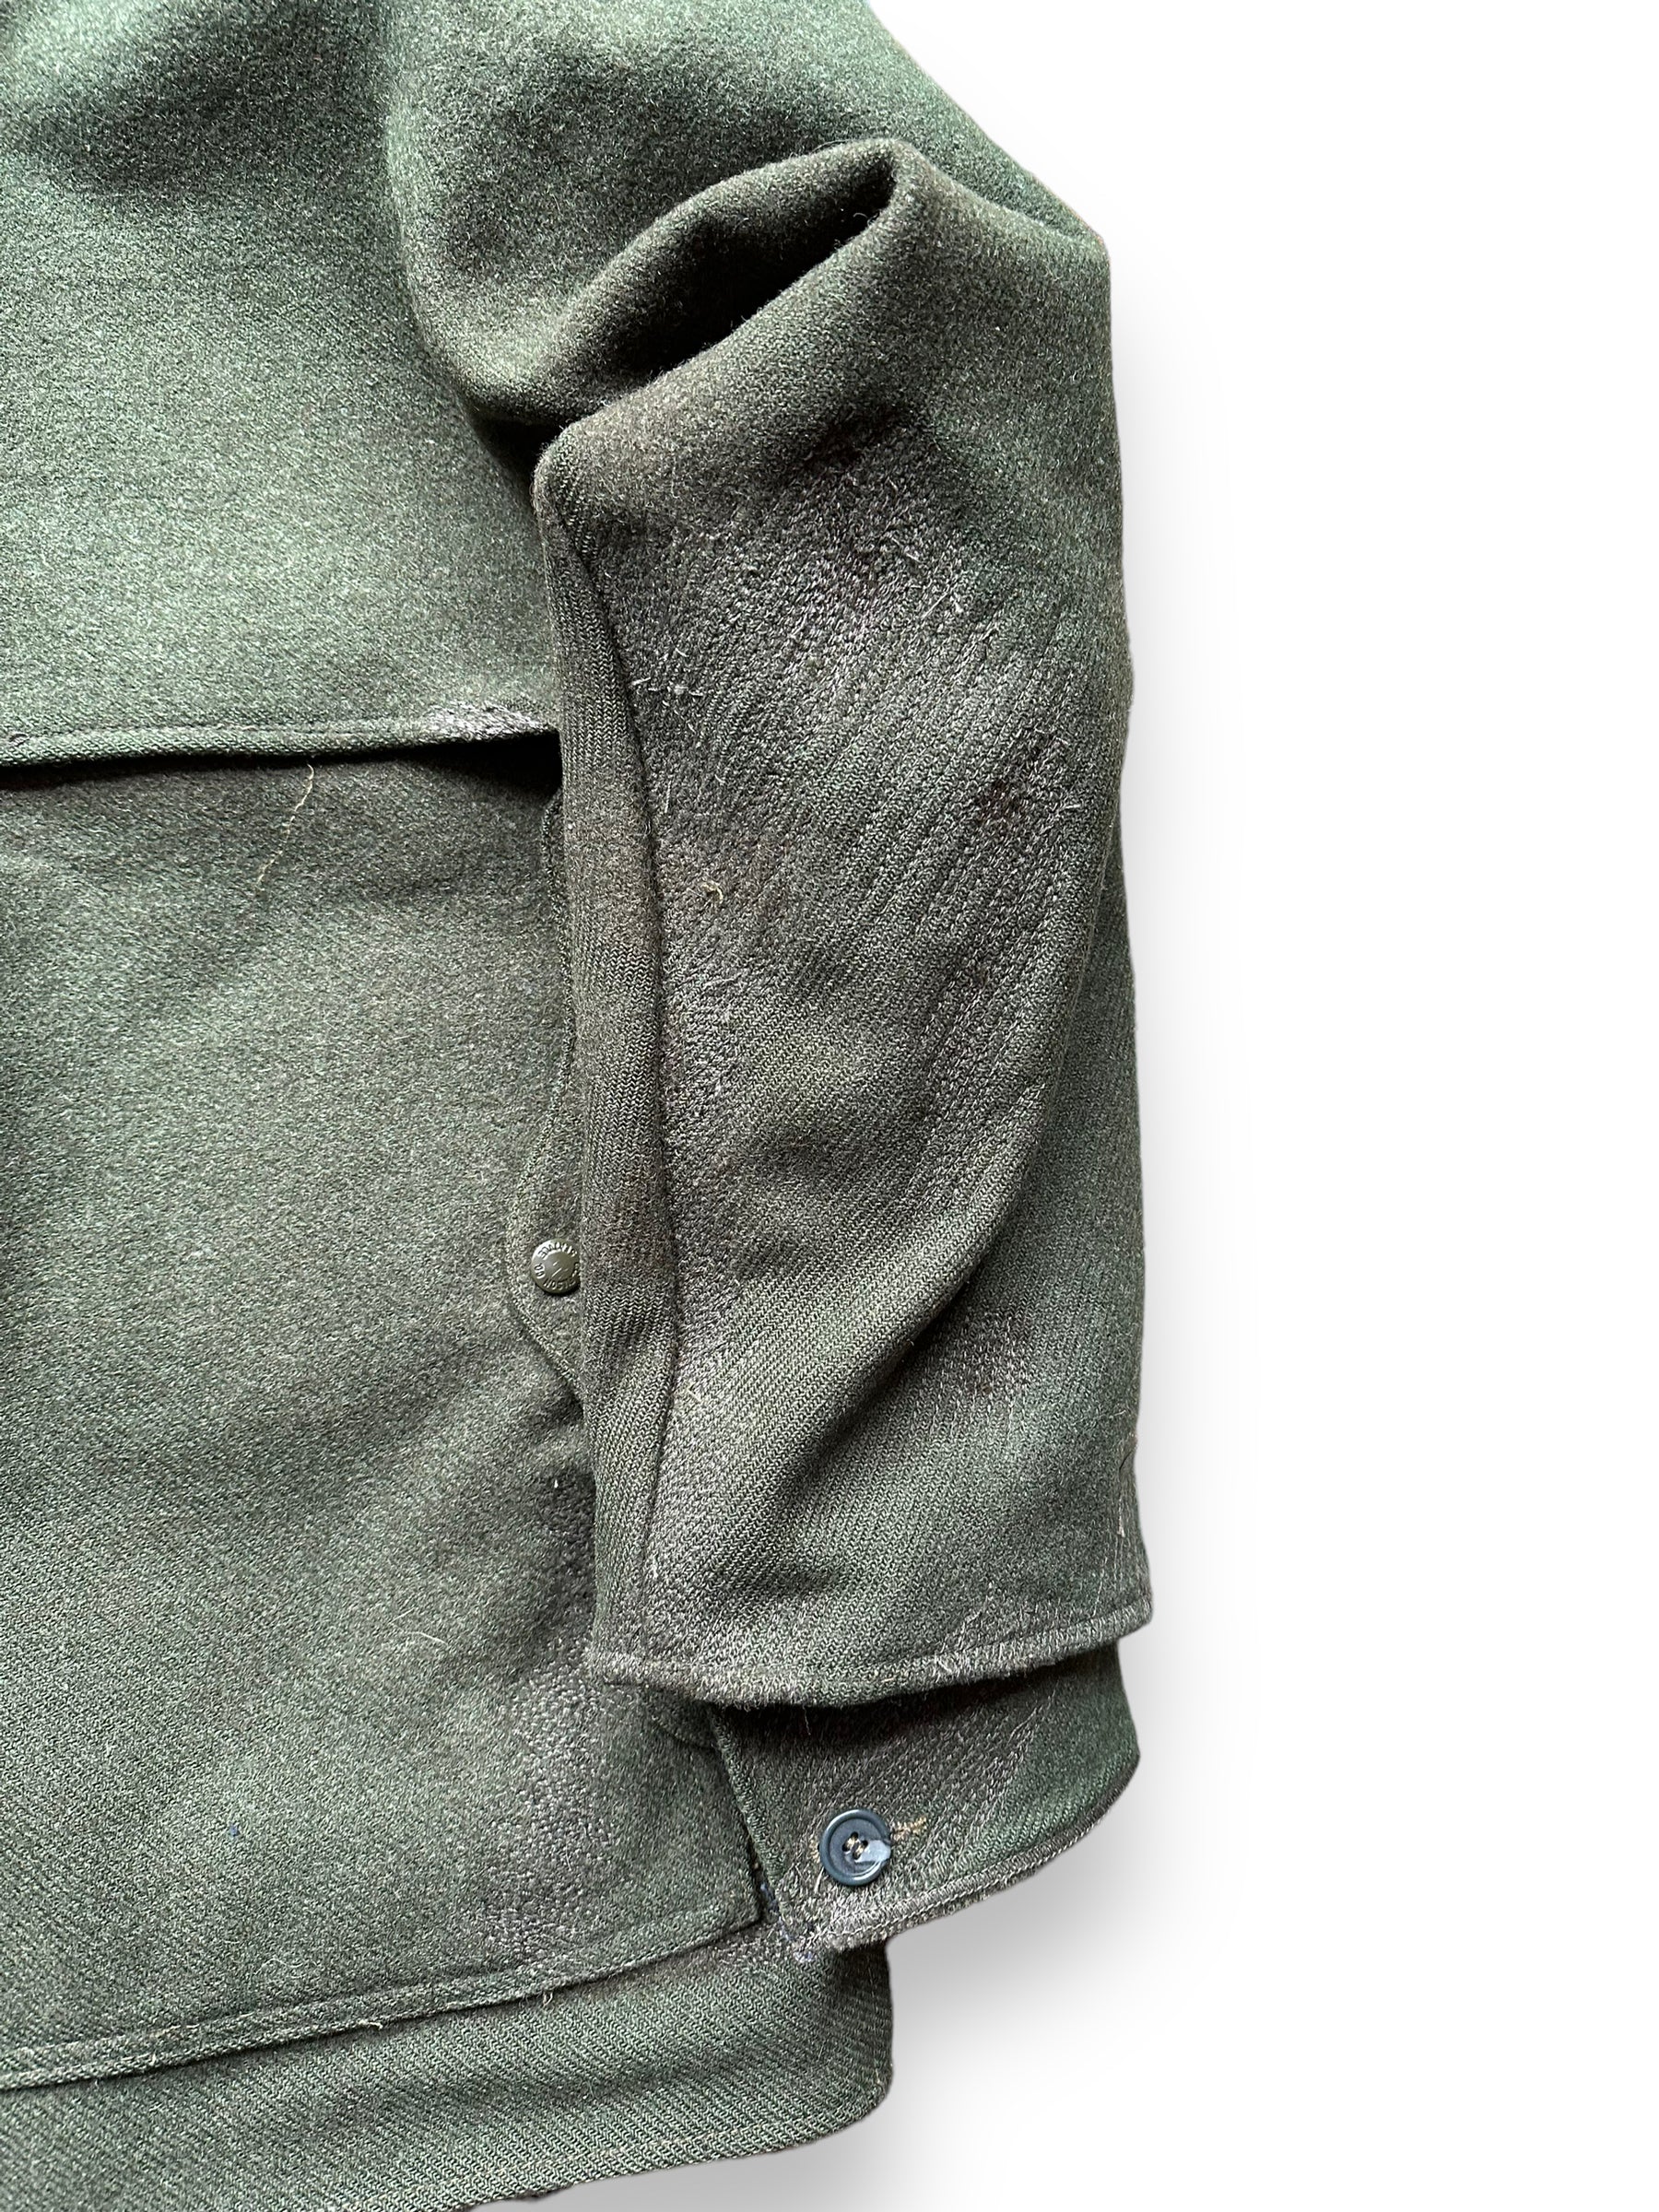 Right Arm Darned Repairs on Vintage Filson Forest Green Repaired Double Mackinaw Cruiser SZ 40 |  Vintage Filson Cruiser Seattle | Vintage Workwear Seattle